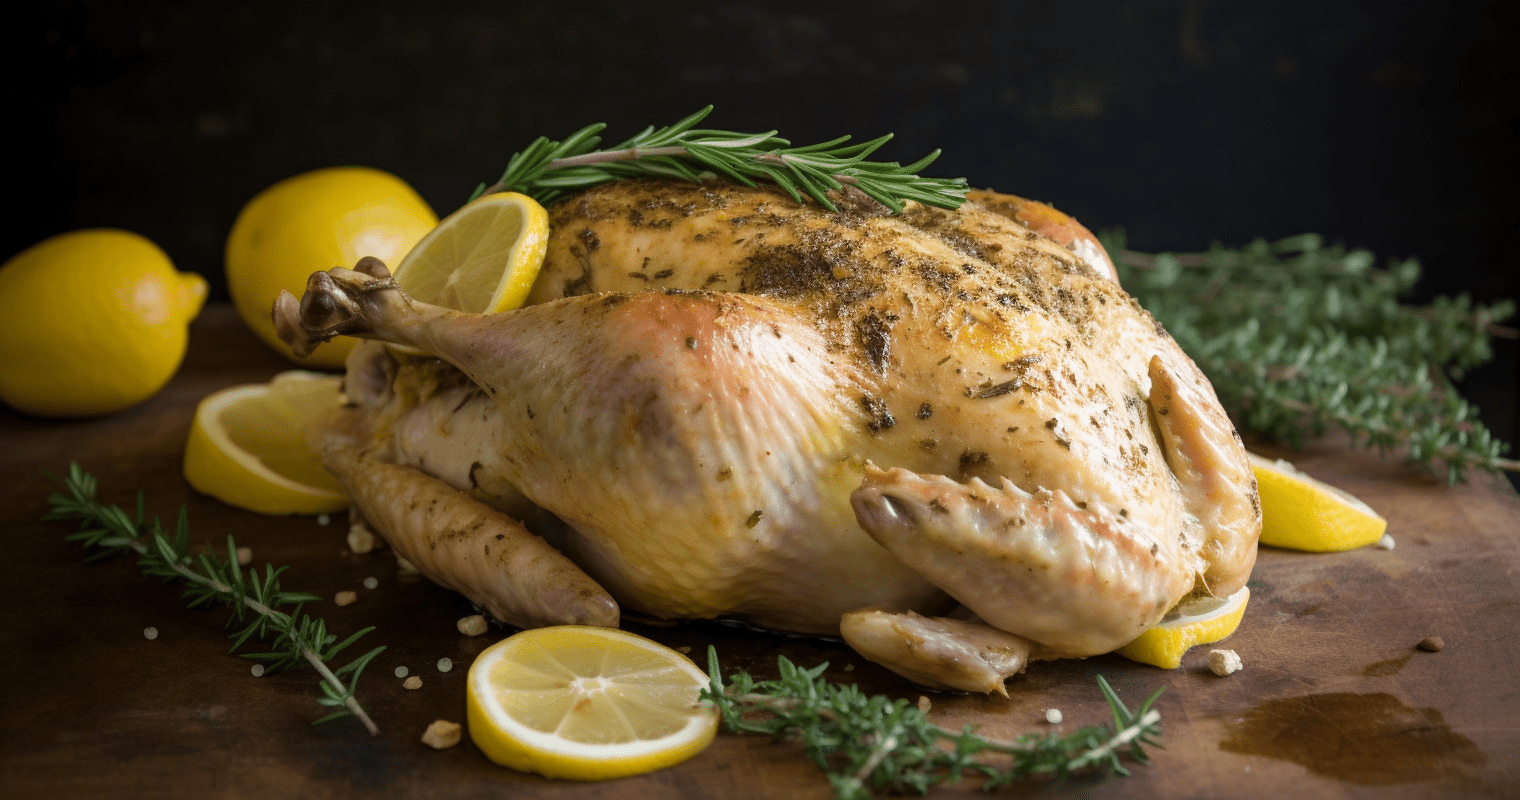 Lemon Herb Roasted Chicken Cooking Instructions